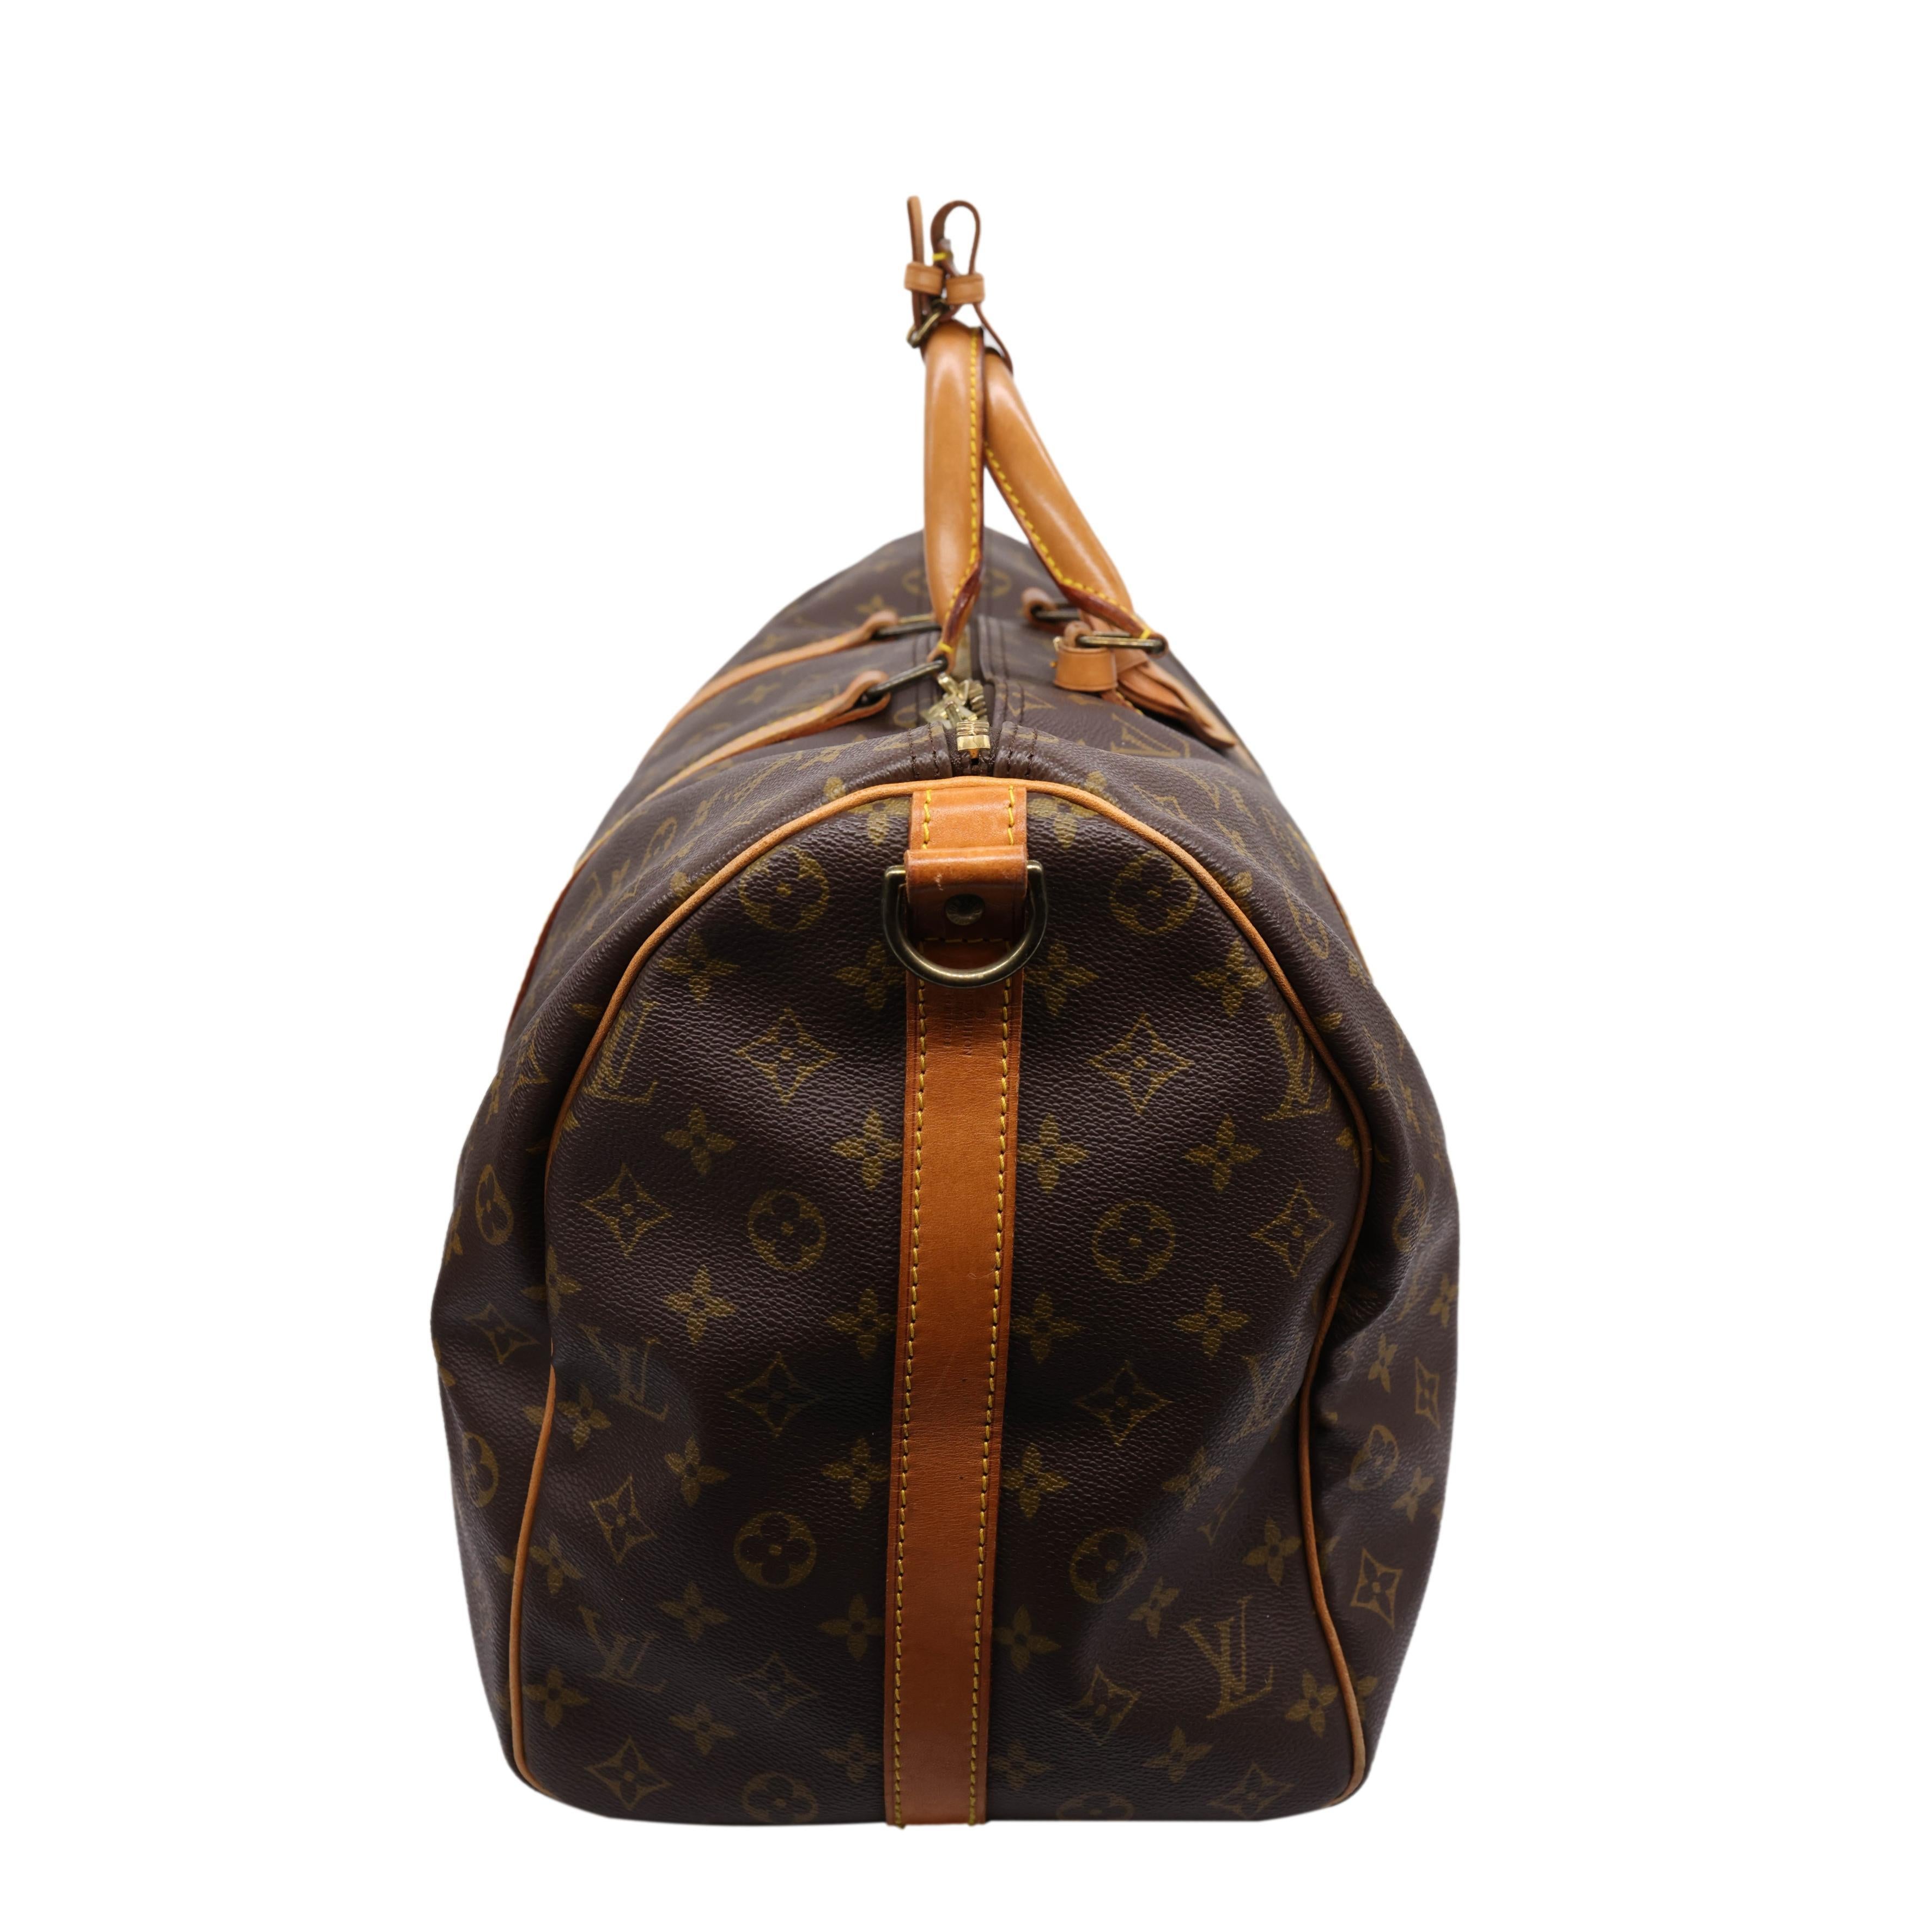 Louis Vuitton Monogram Keepall 50 Bandouliere Duffle Bag, France 1984. This iconic keepall was first introduced in the 1930's by Gaston Vuitton as the city 